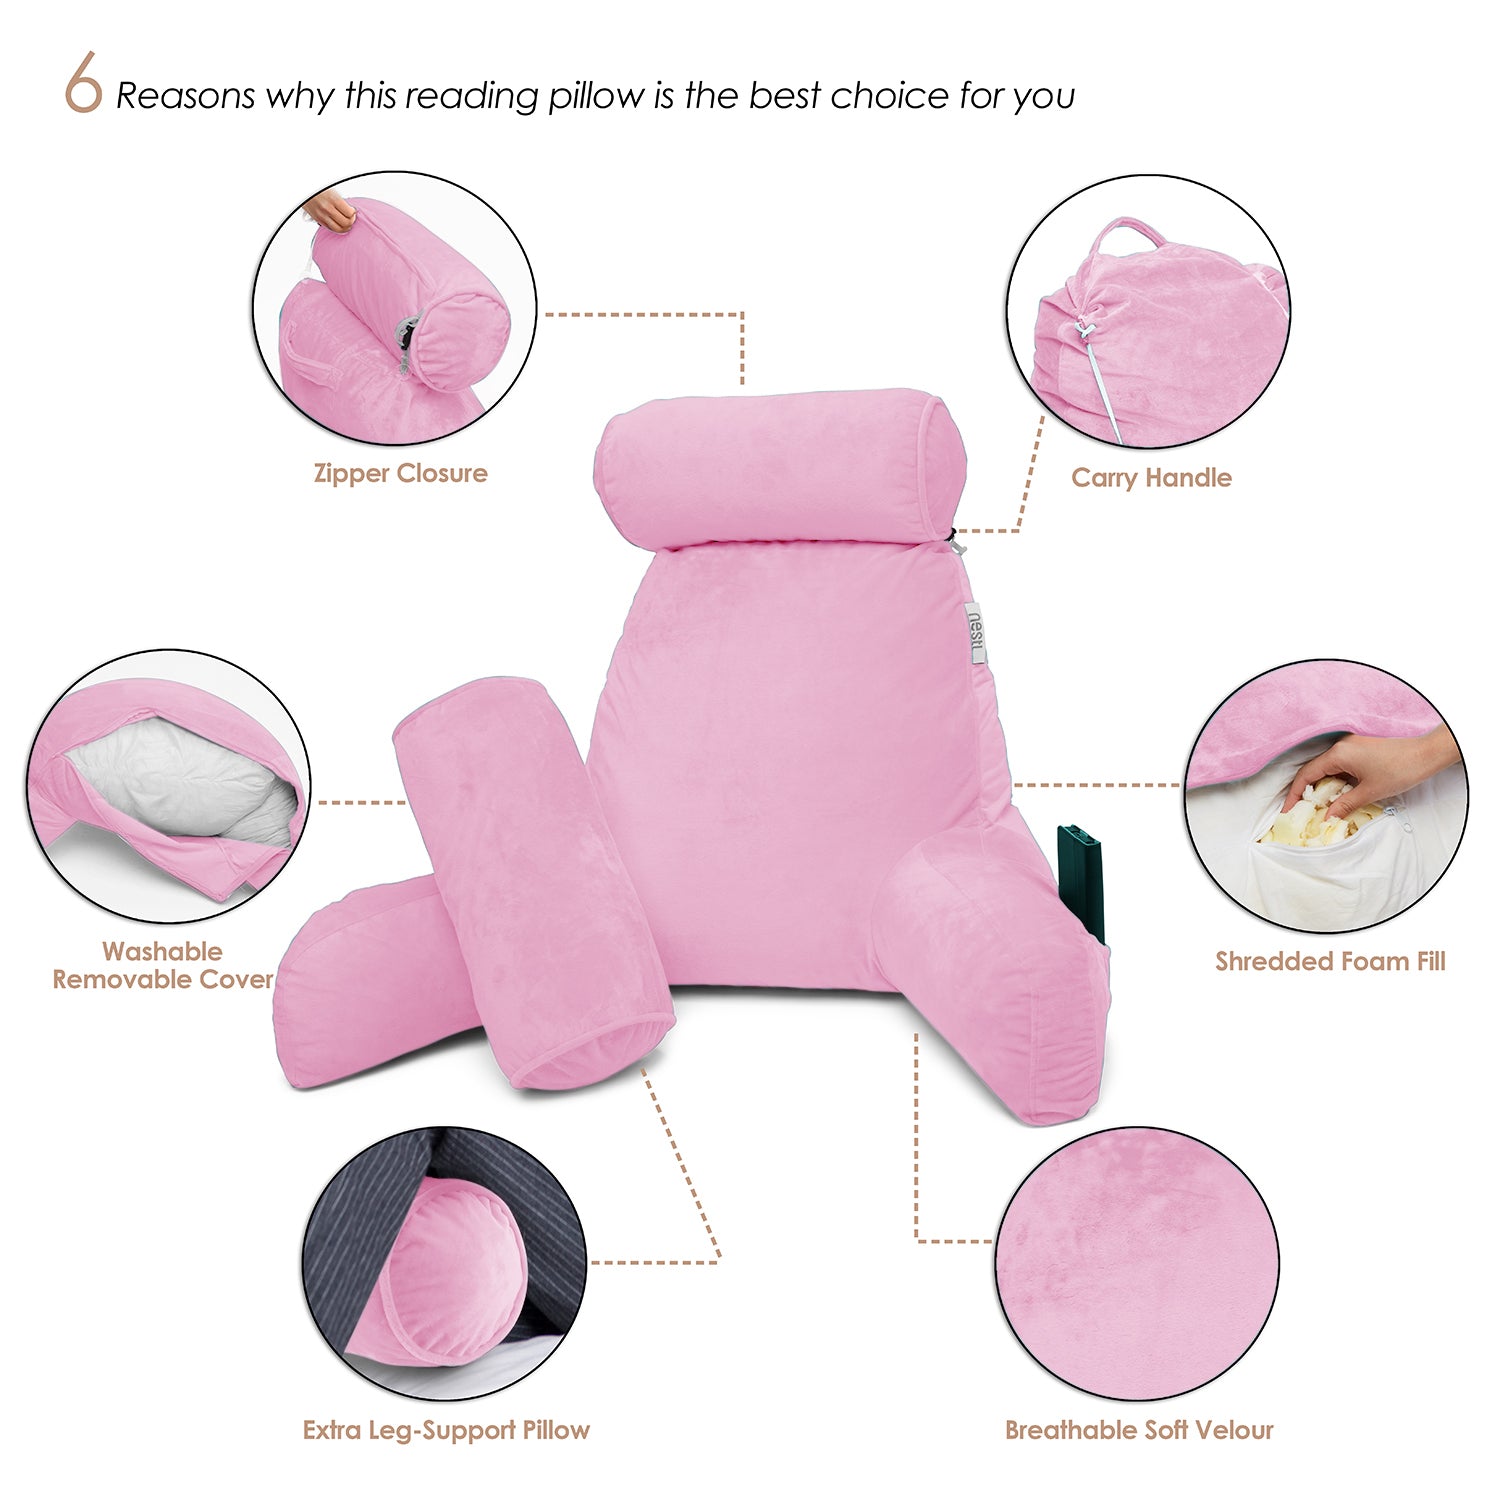 Nestl Backrest Reading Pillow, Bed Rest Pillow with Arms for Sitting In Bed,  Shredded Memory Foam Back Support Pillow, Light Pink 